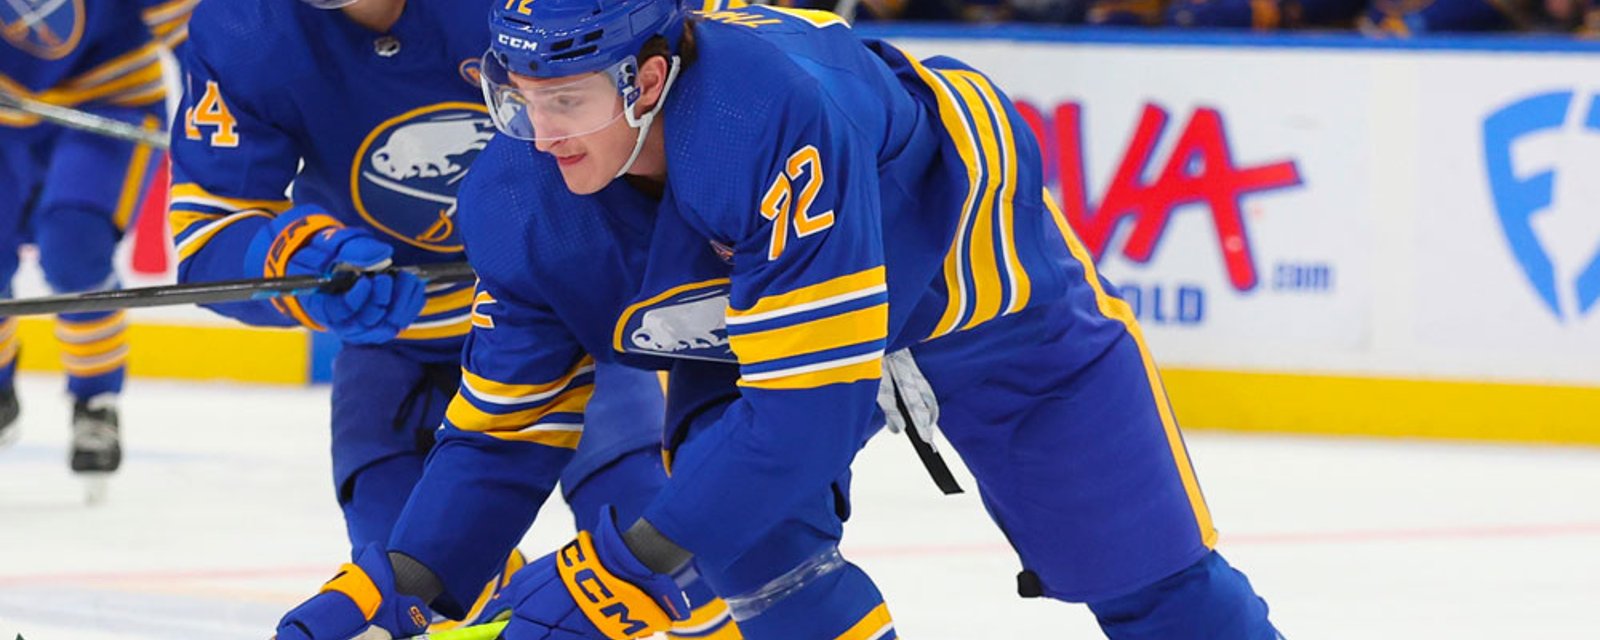 Sabres confirm the worst for Tage Thompson after tonight's injury